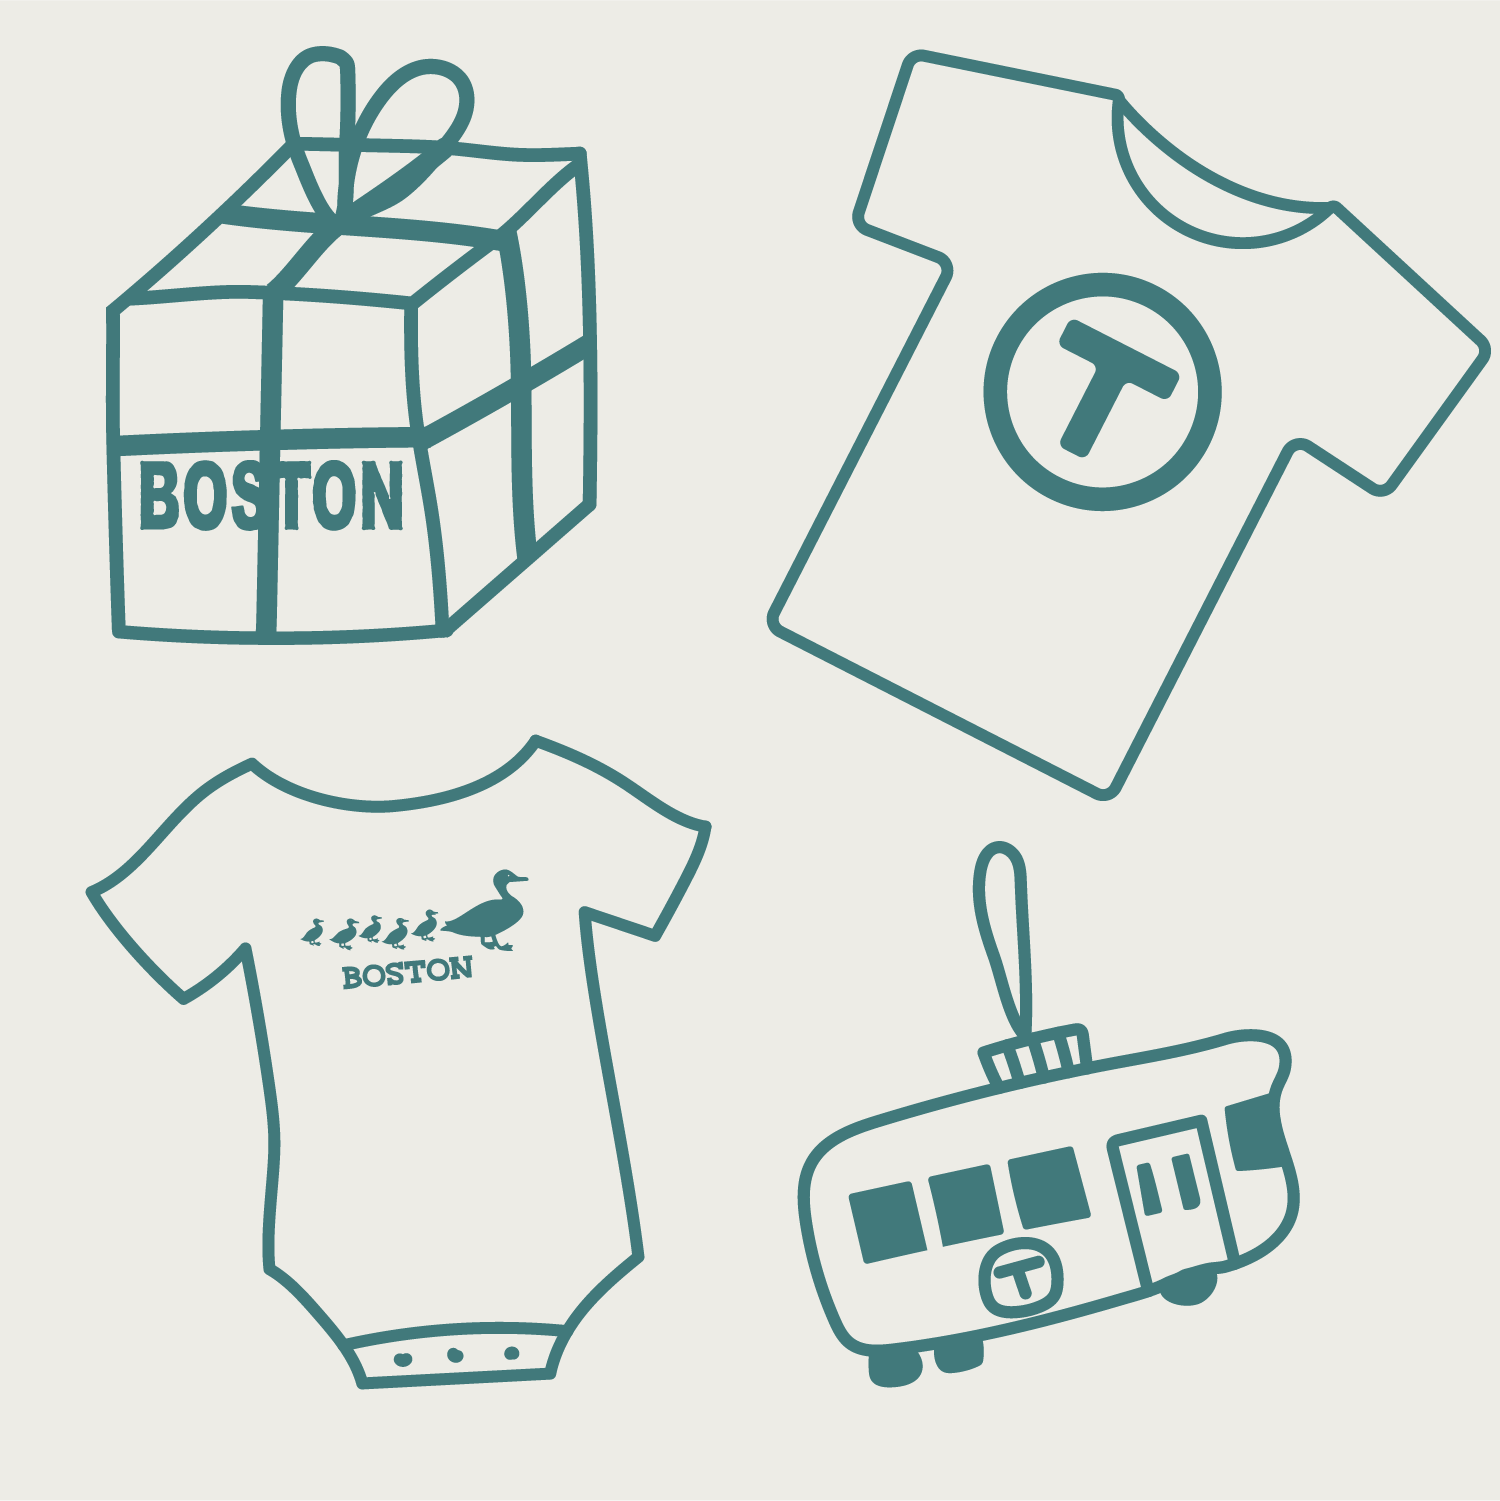 Shop for unique Boston gifts and apparel including MBTA-branded merchandise